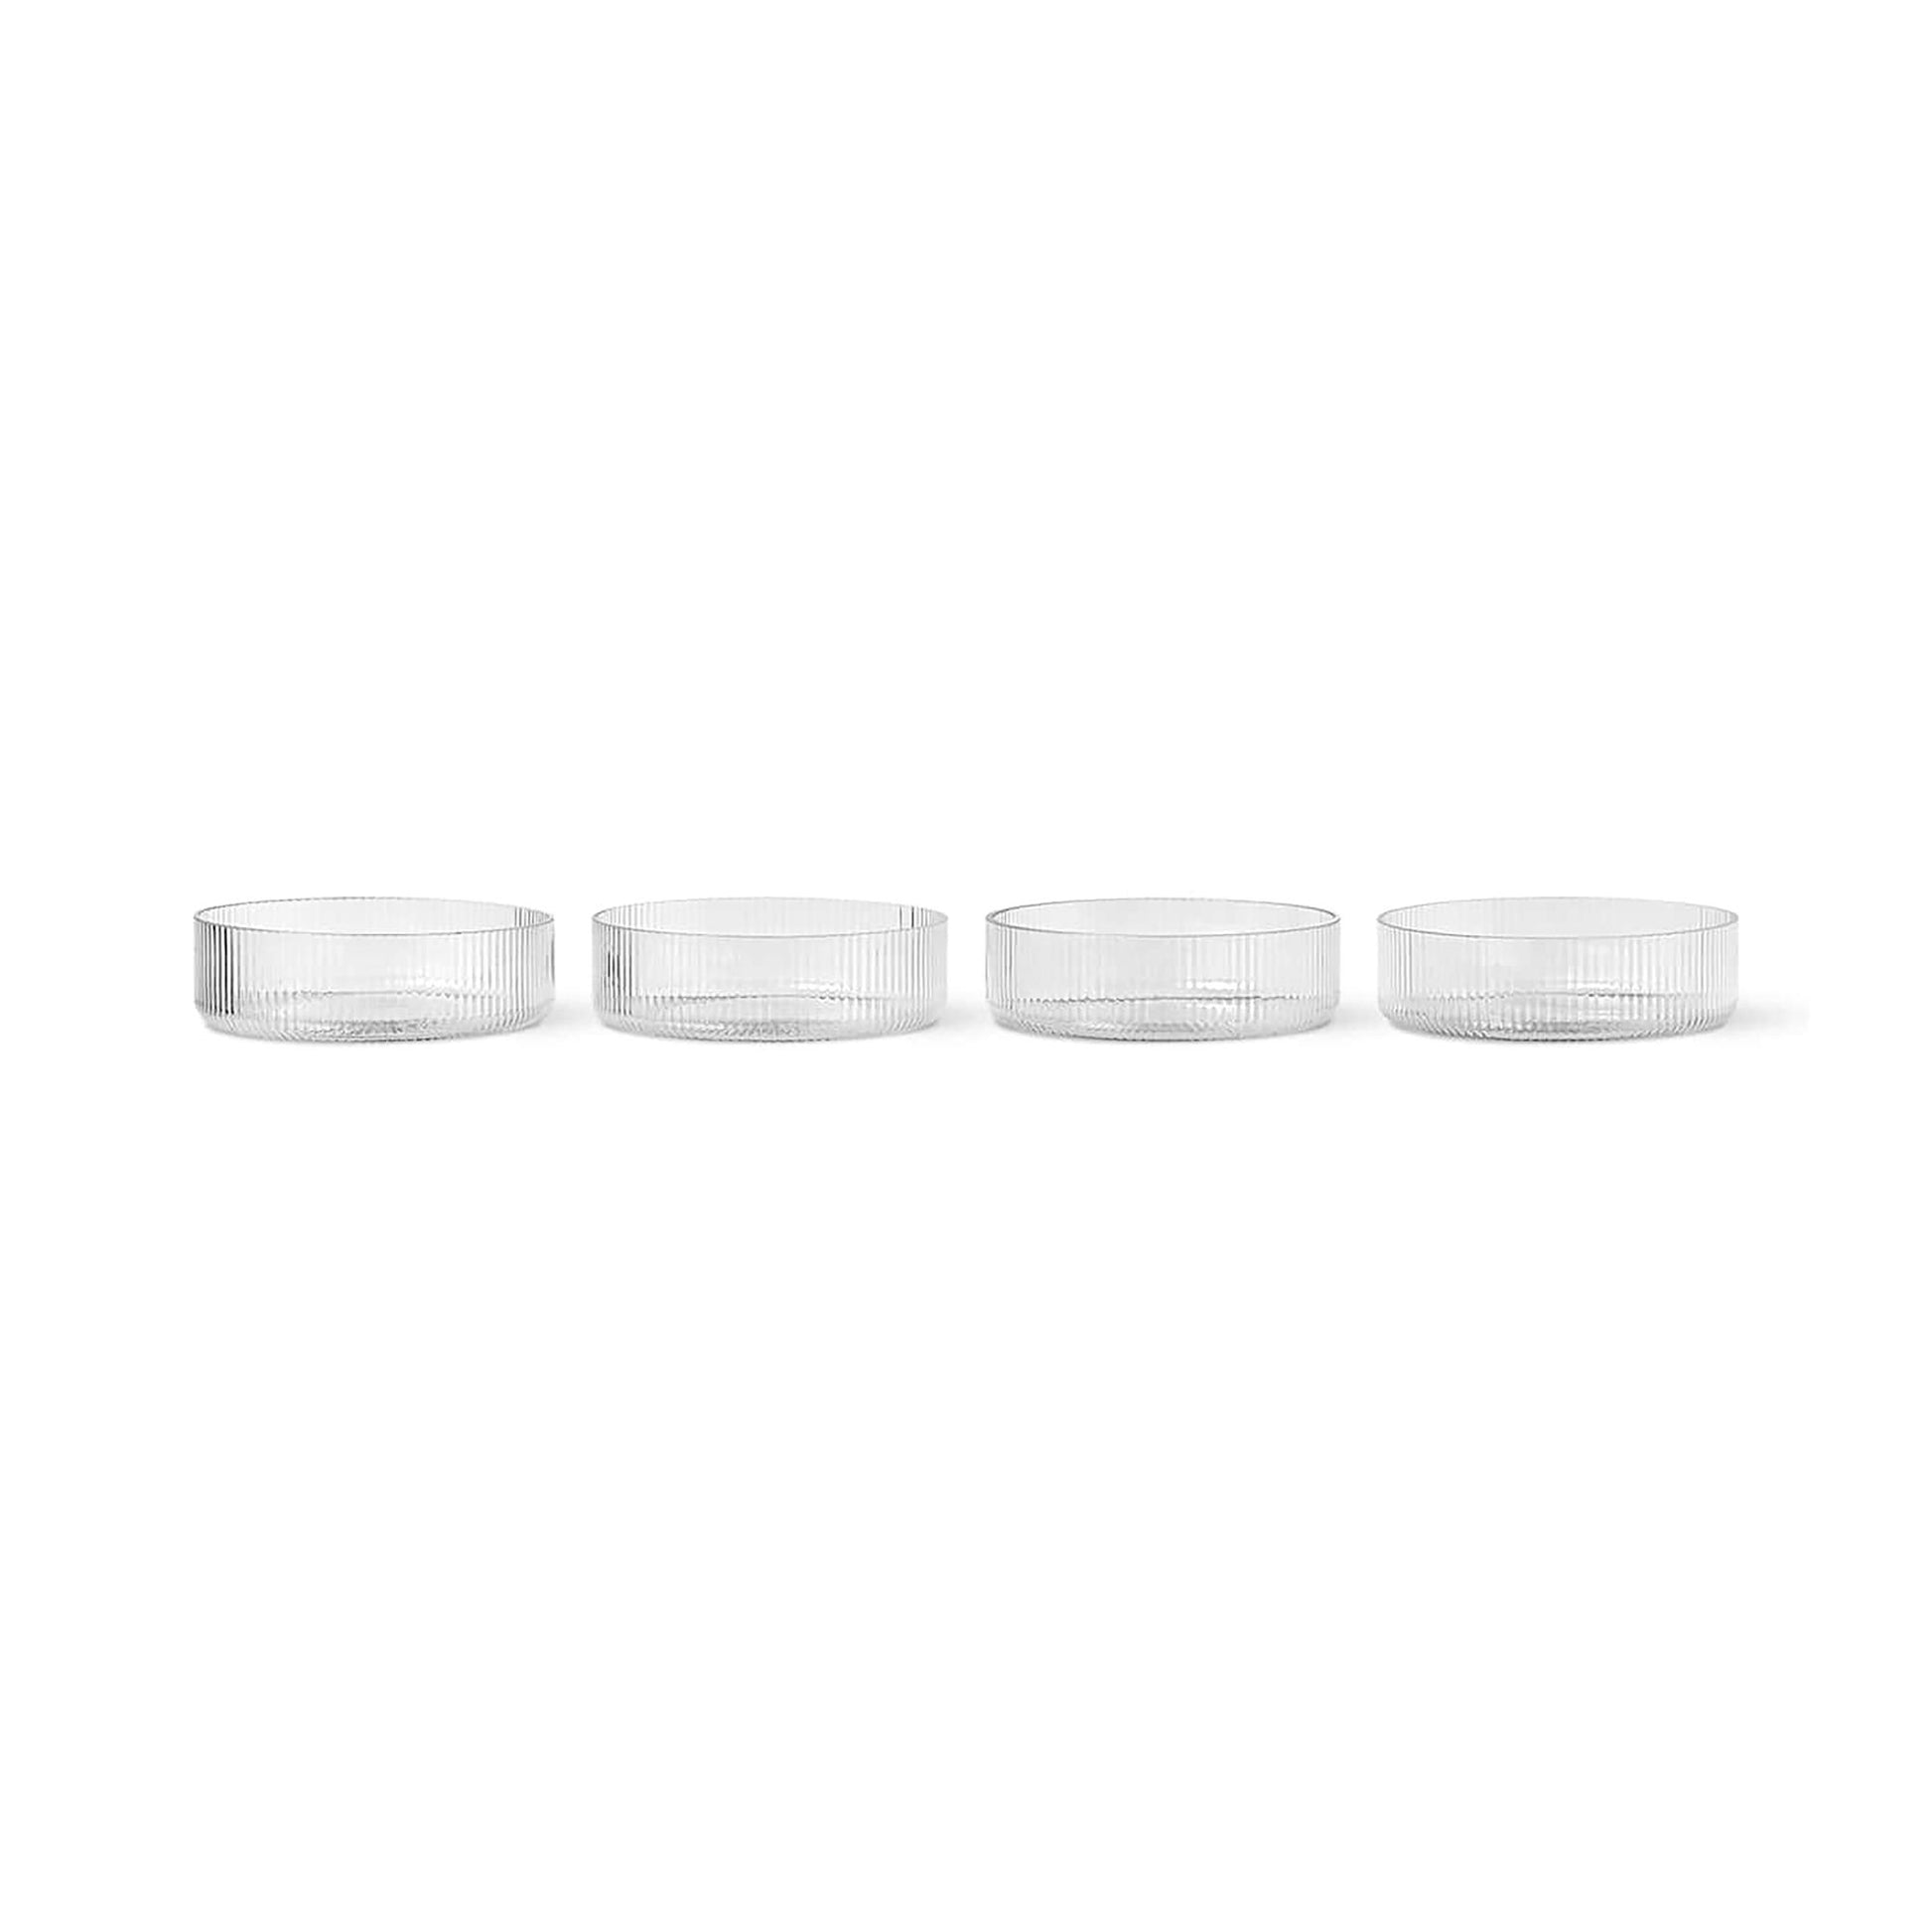 Ripple Serving Bowl Set of 4 by Ferm Living #Clear